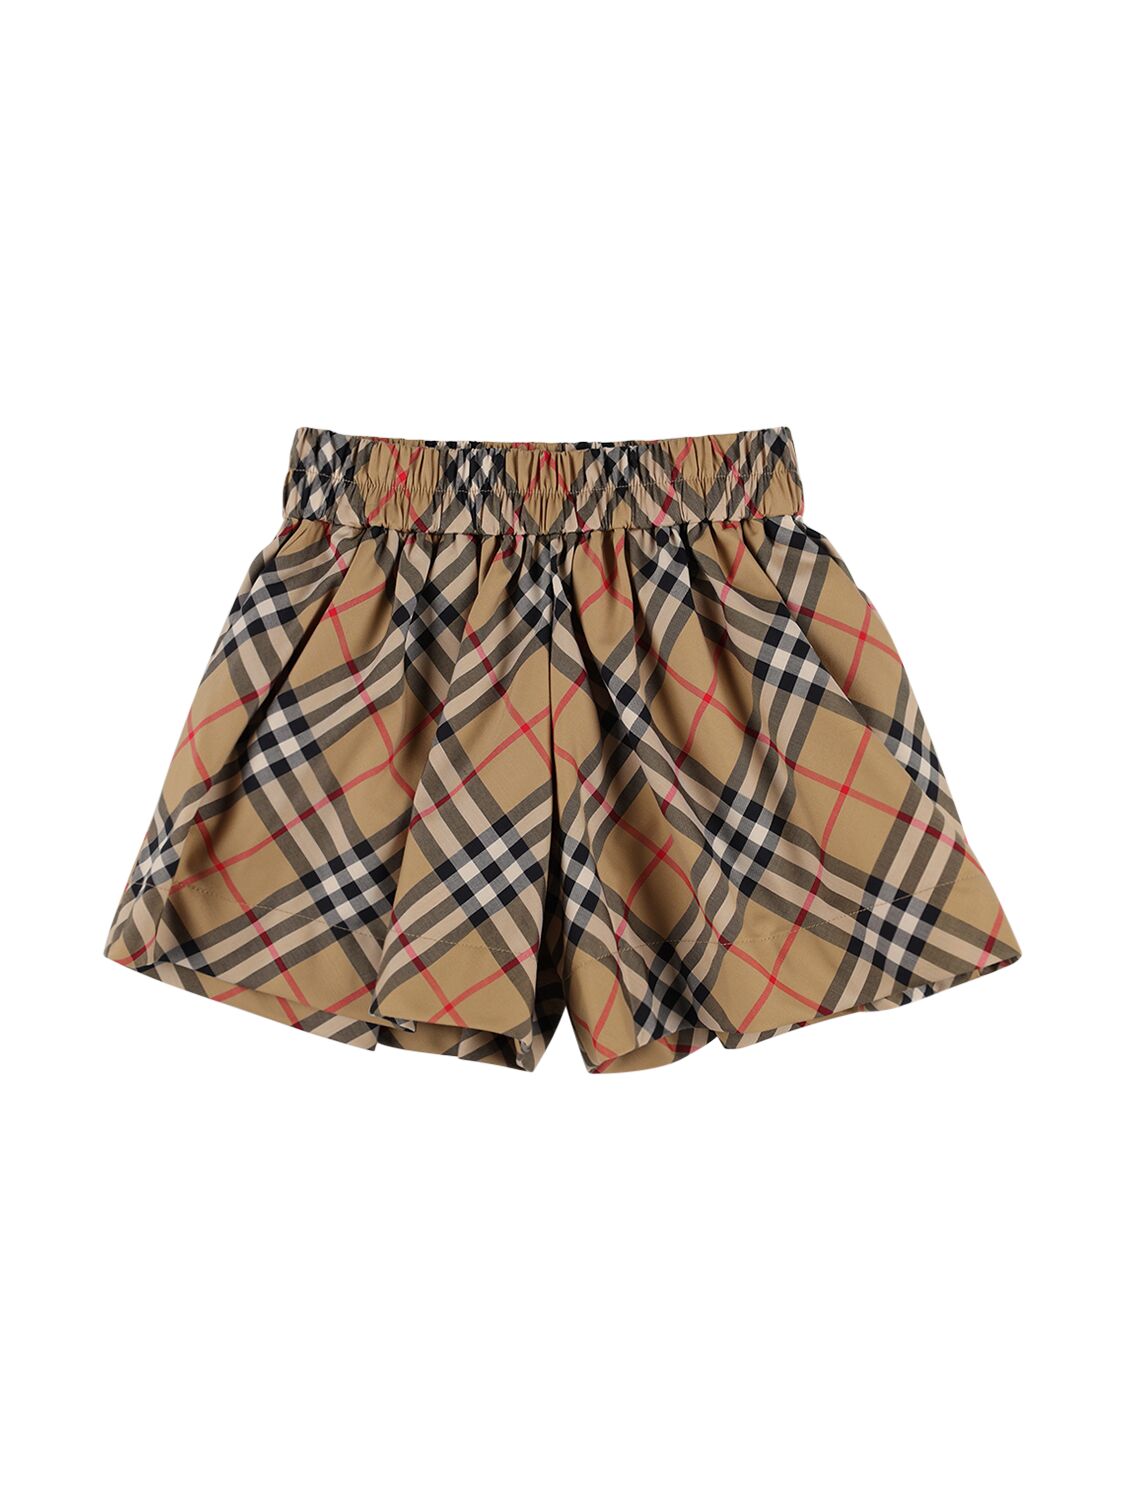 Image of Check Print Pleated Cotton Blend Shorts